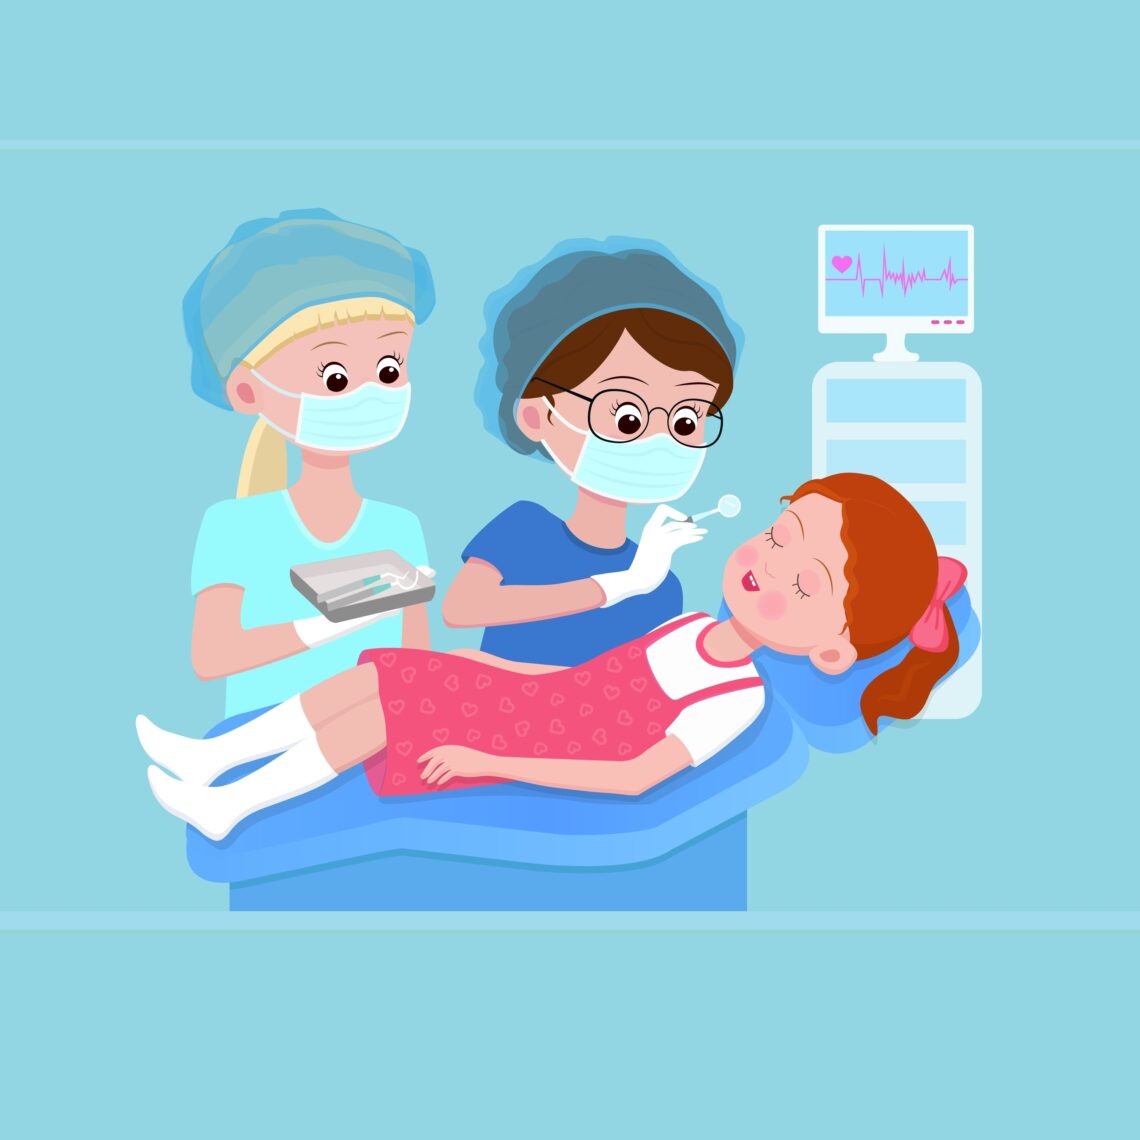 Children's dental treatment under general anesthesia.Square cartoon illustration of a child's teeth treatment under general anesthesia.